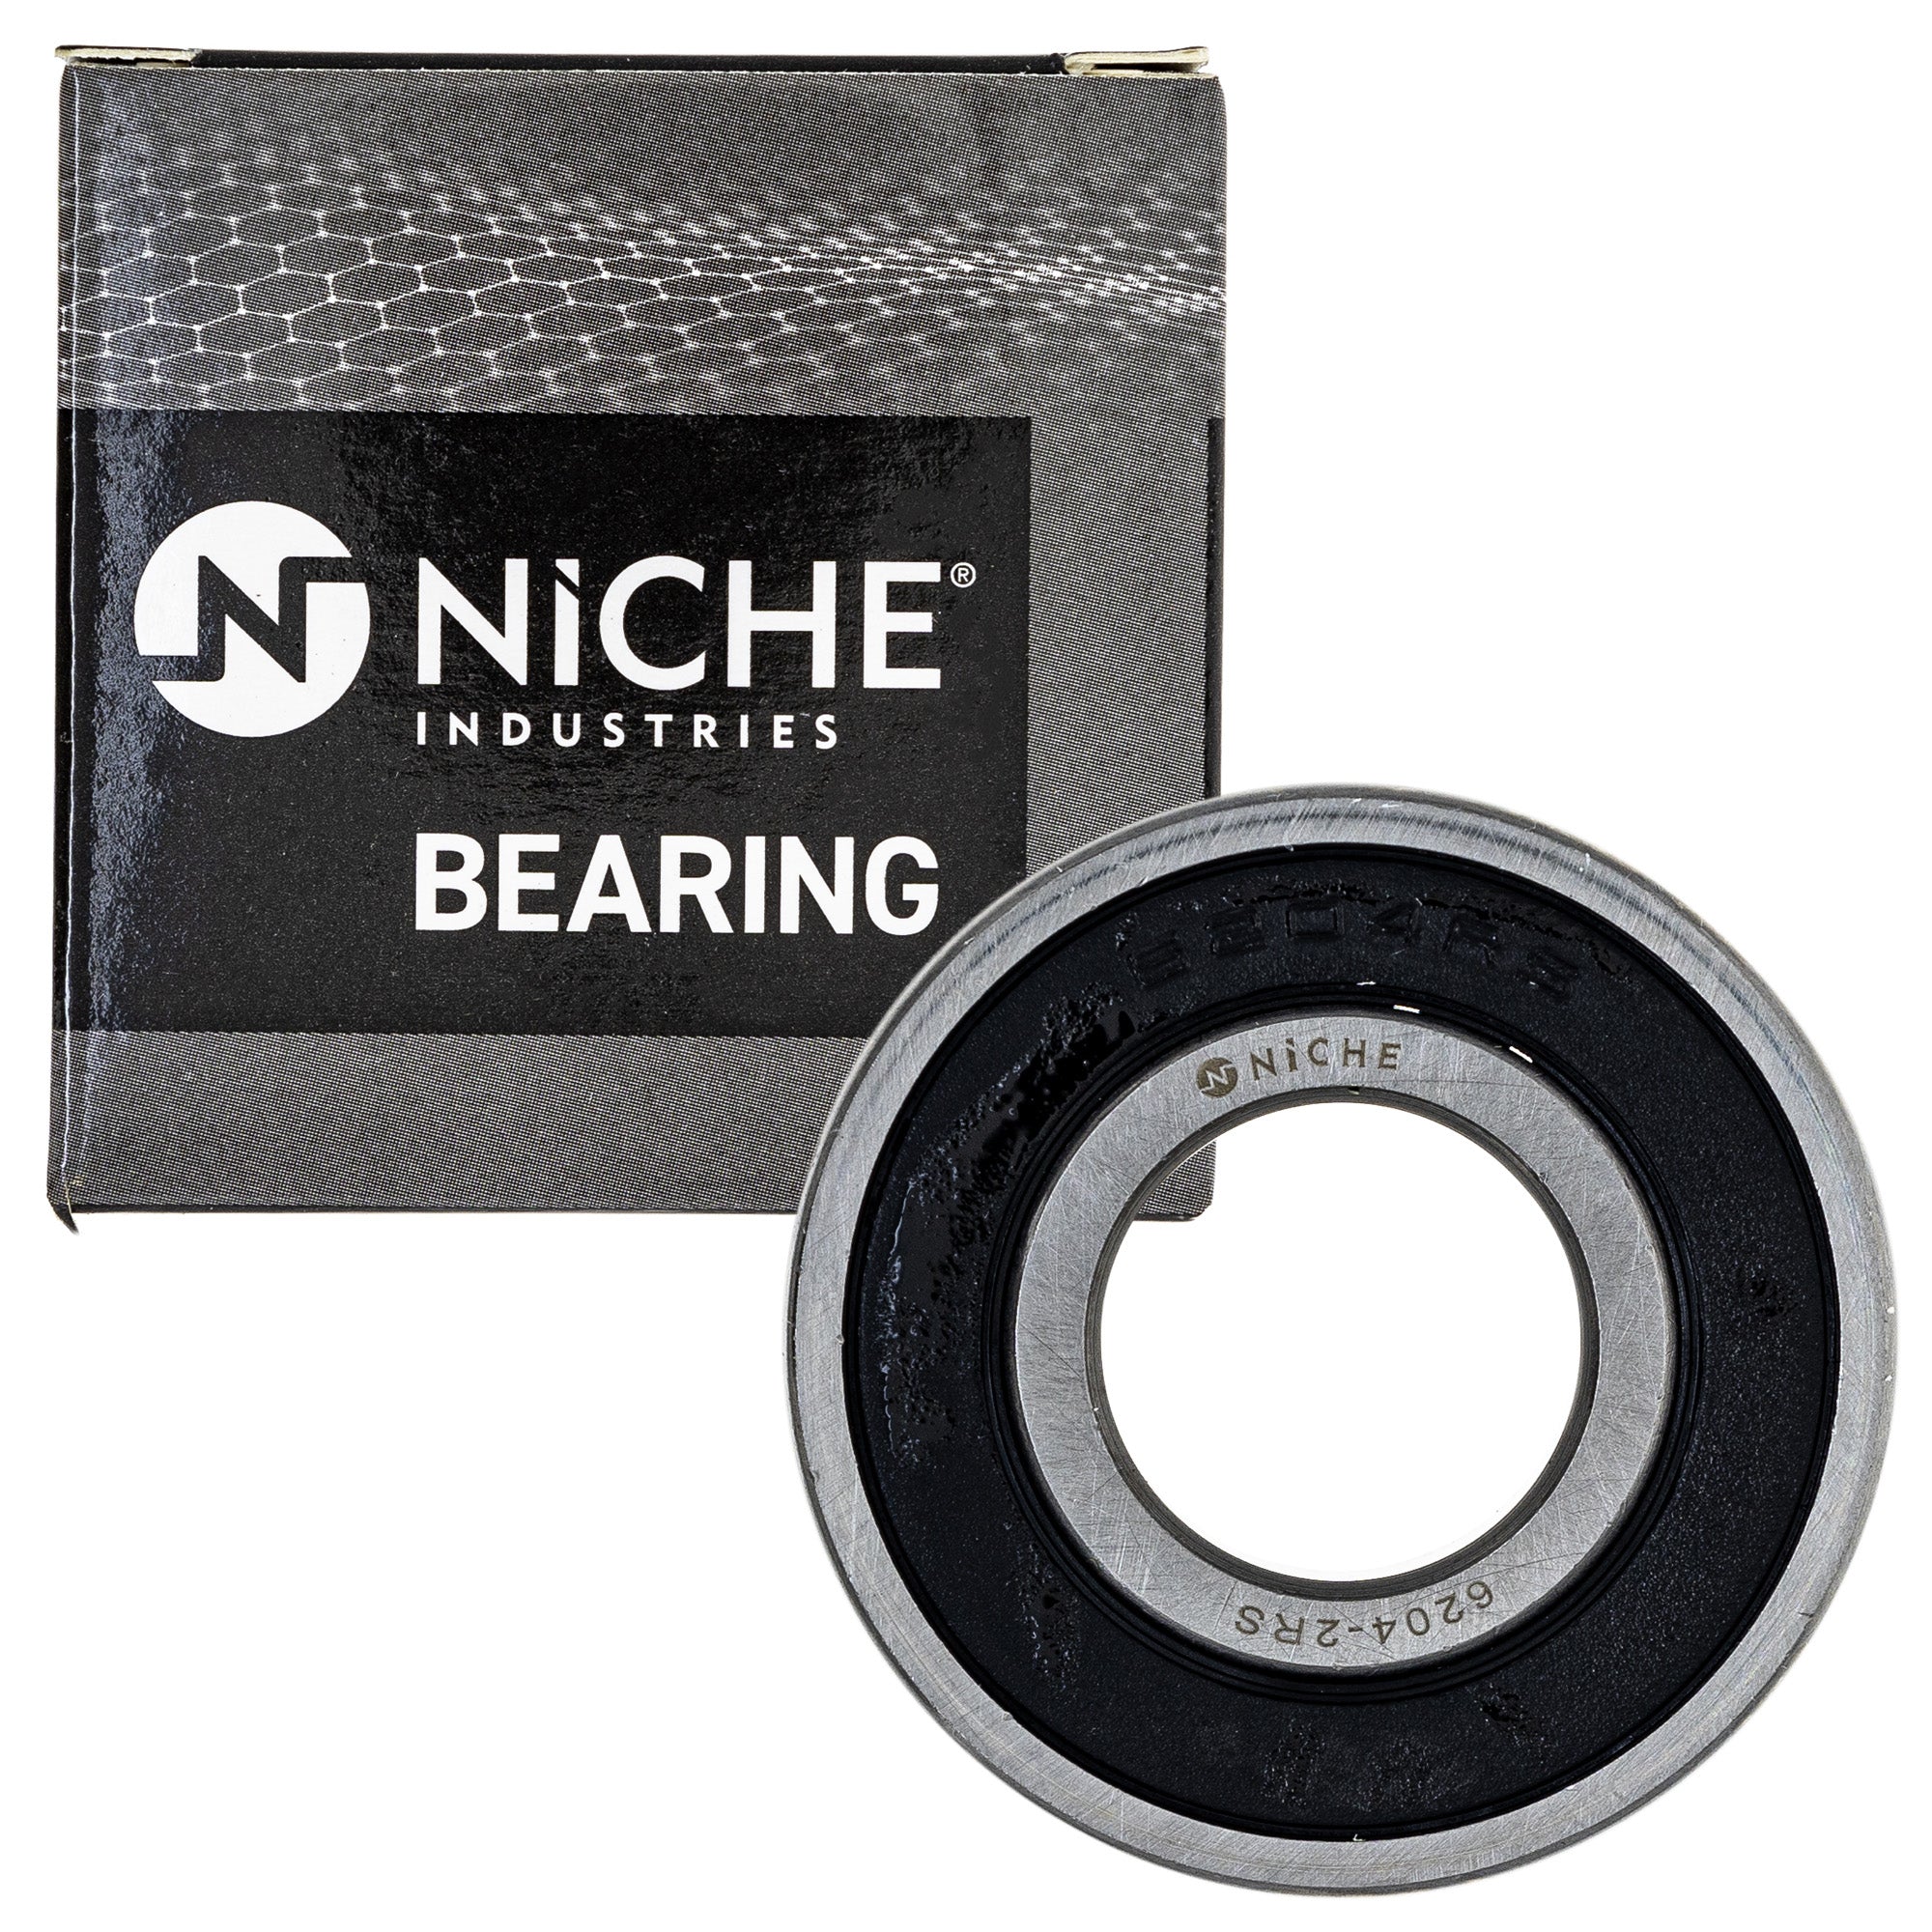 NICHE MK1009205 Wheel Bearing Seal Kit for zOTHER Ref No ST1100